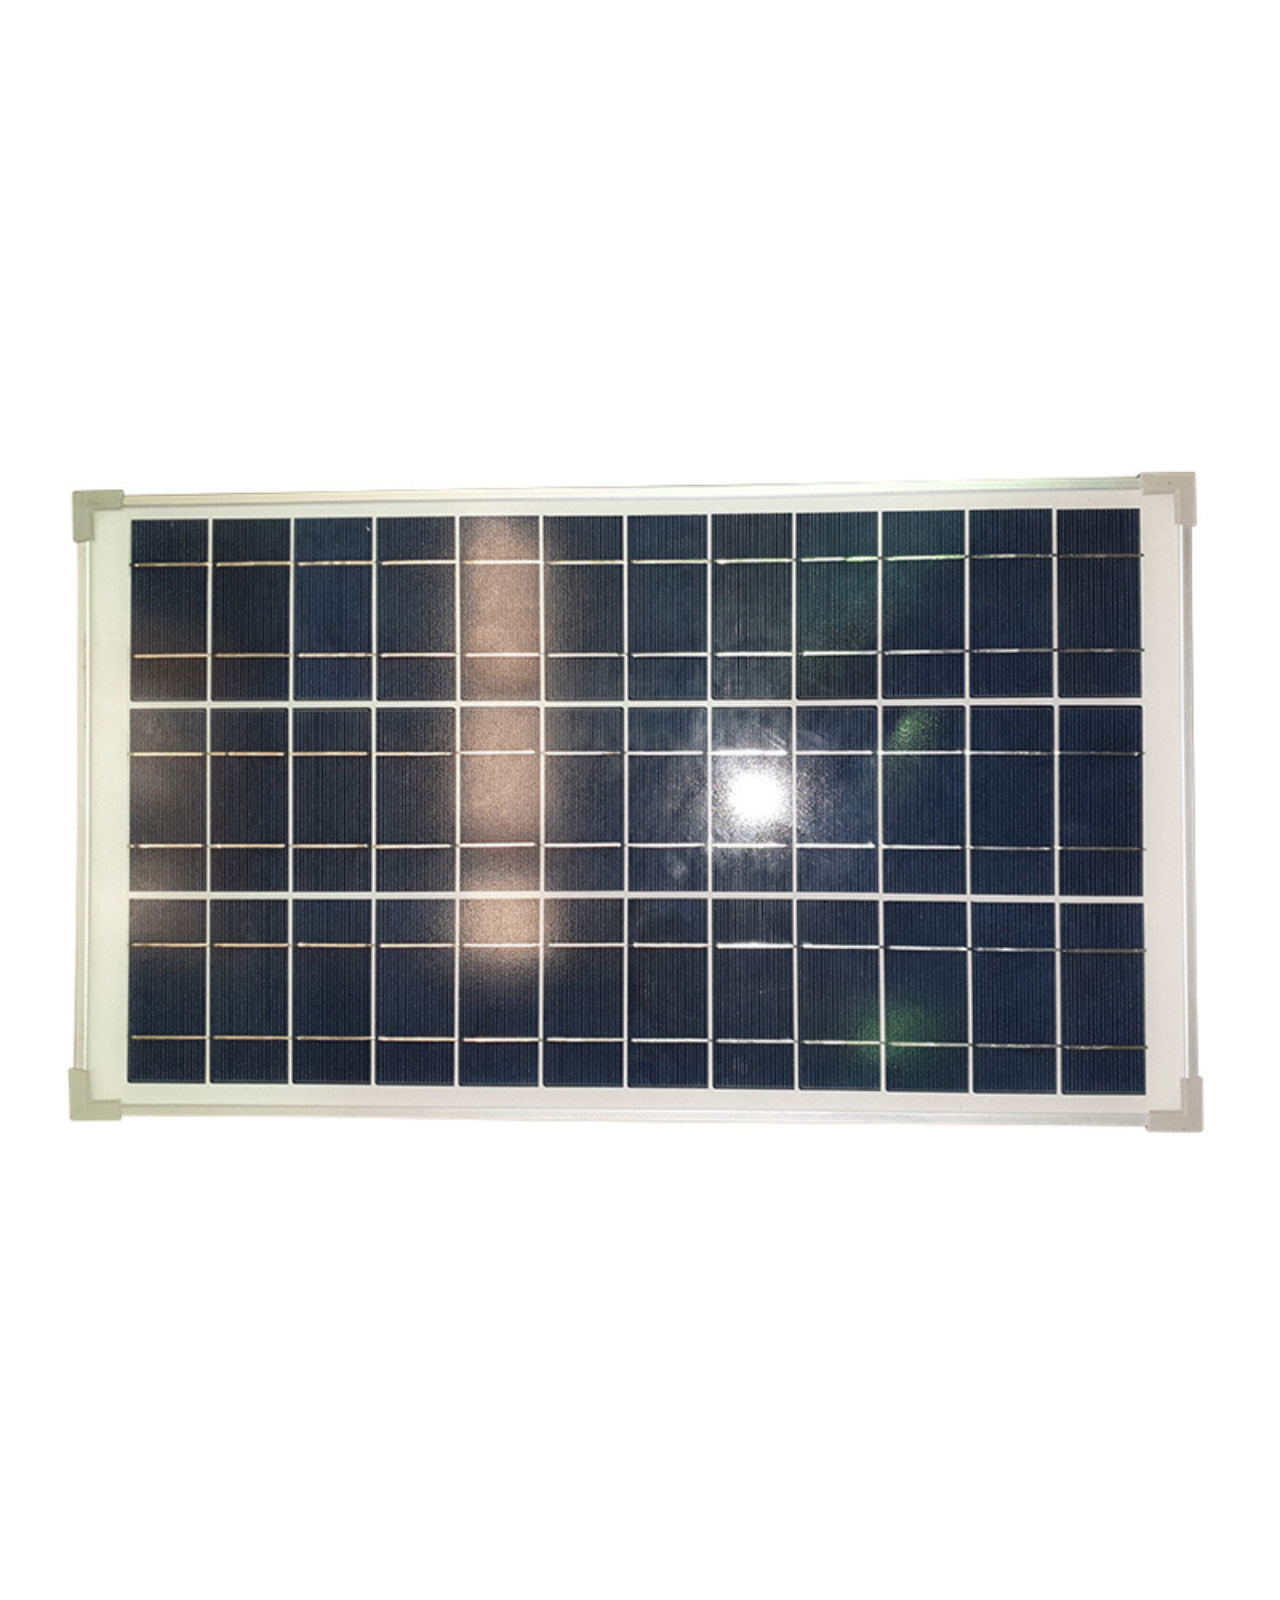 Solar Panels (Set of 2 Panels) for RSF3400 